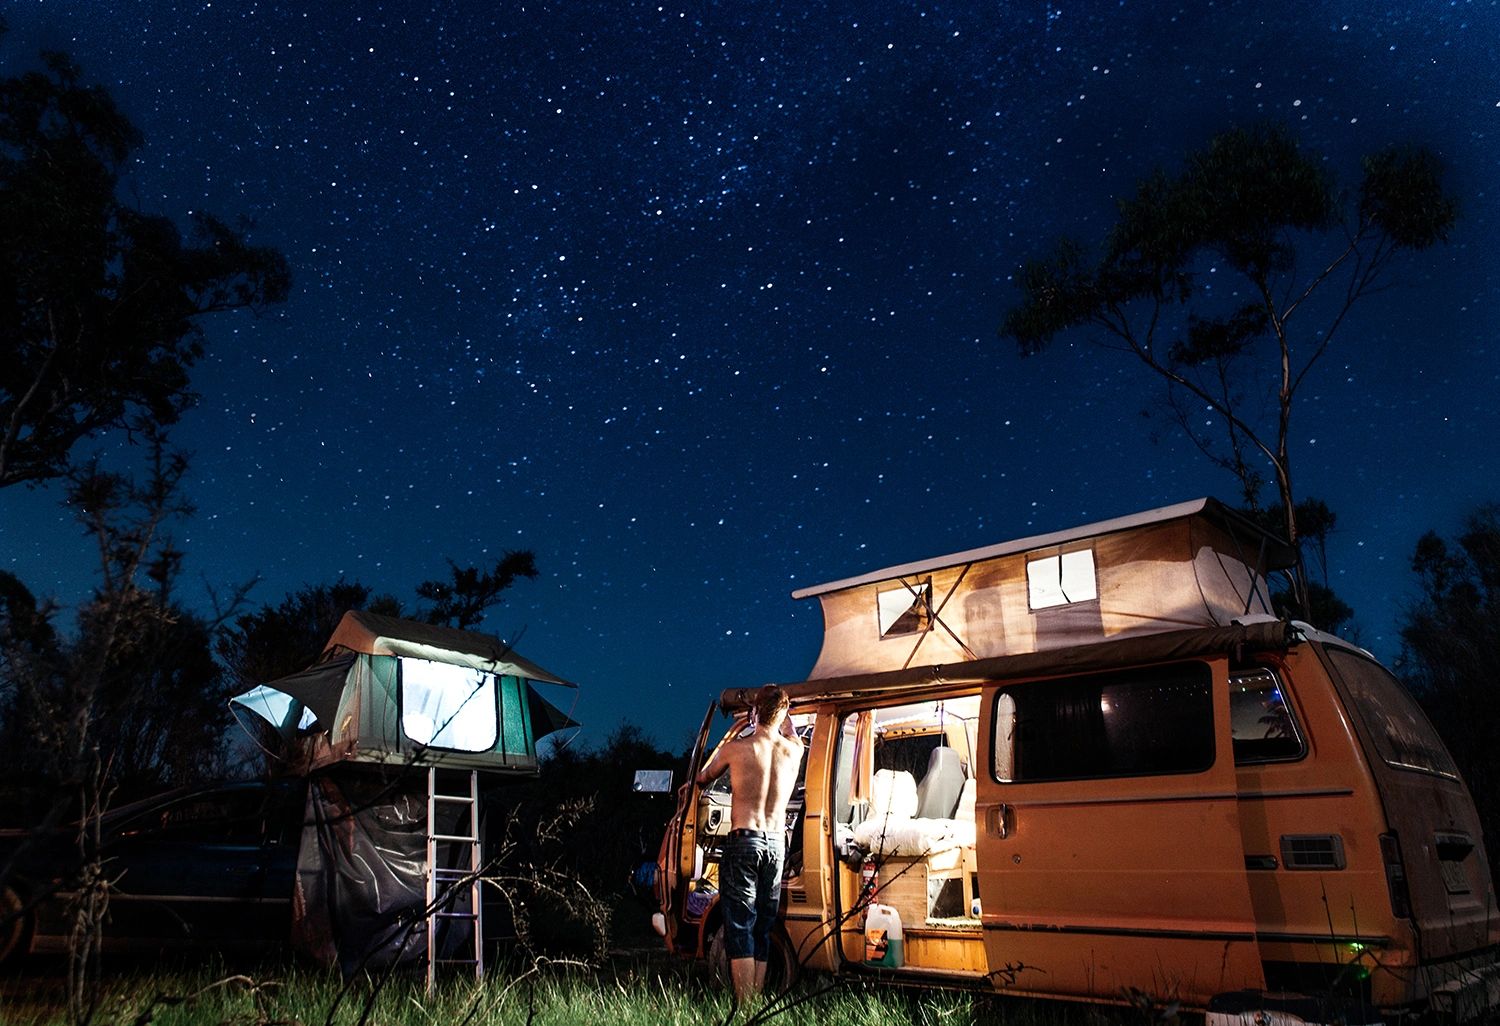 Two campervans parked under a starry night sky with trees in the background